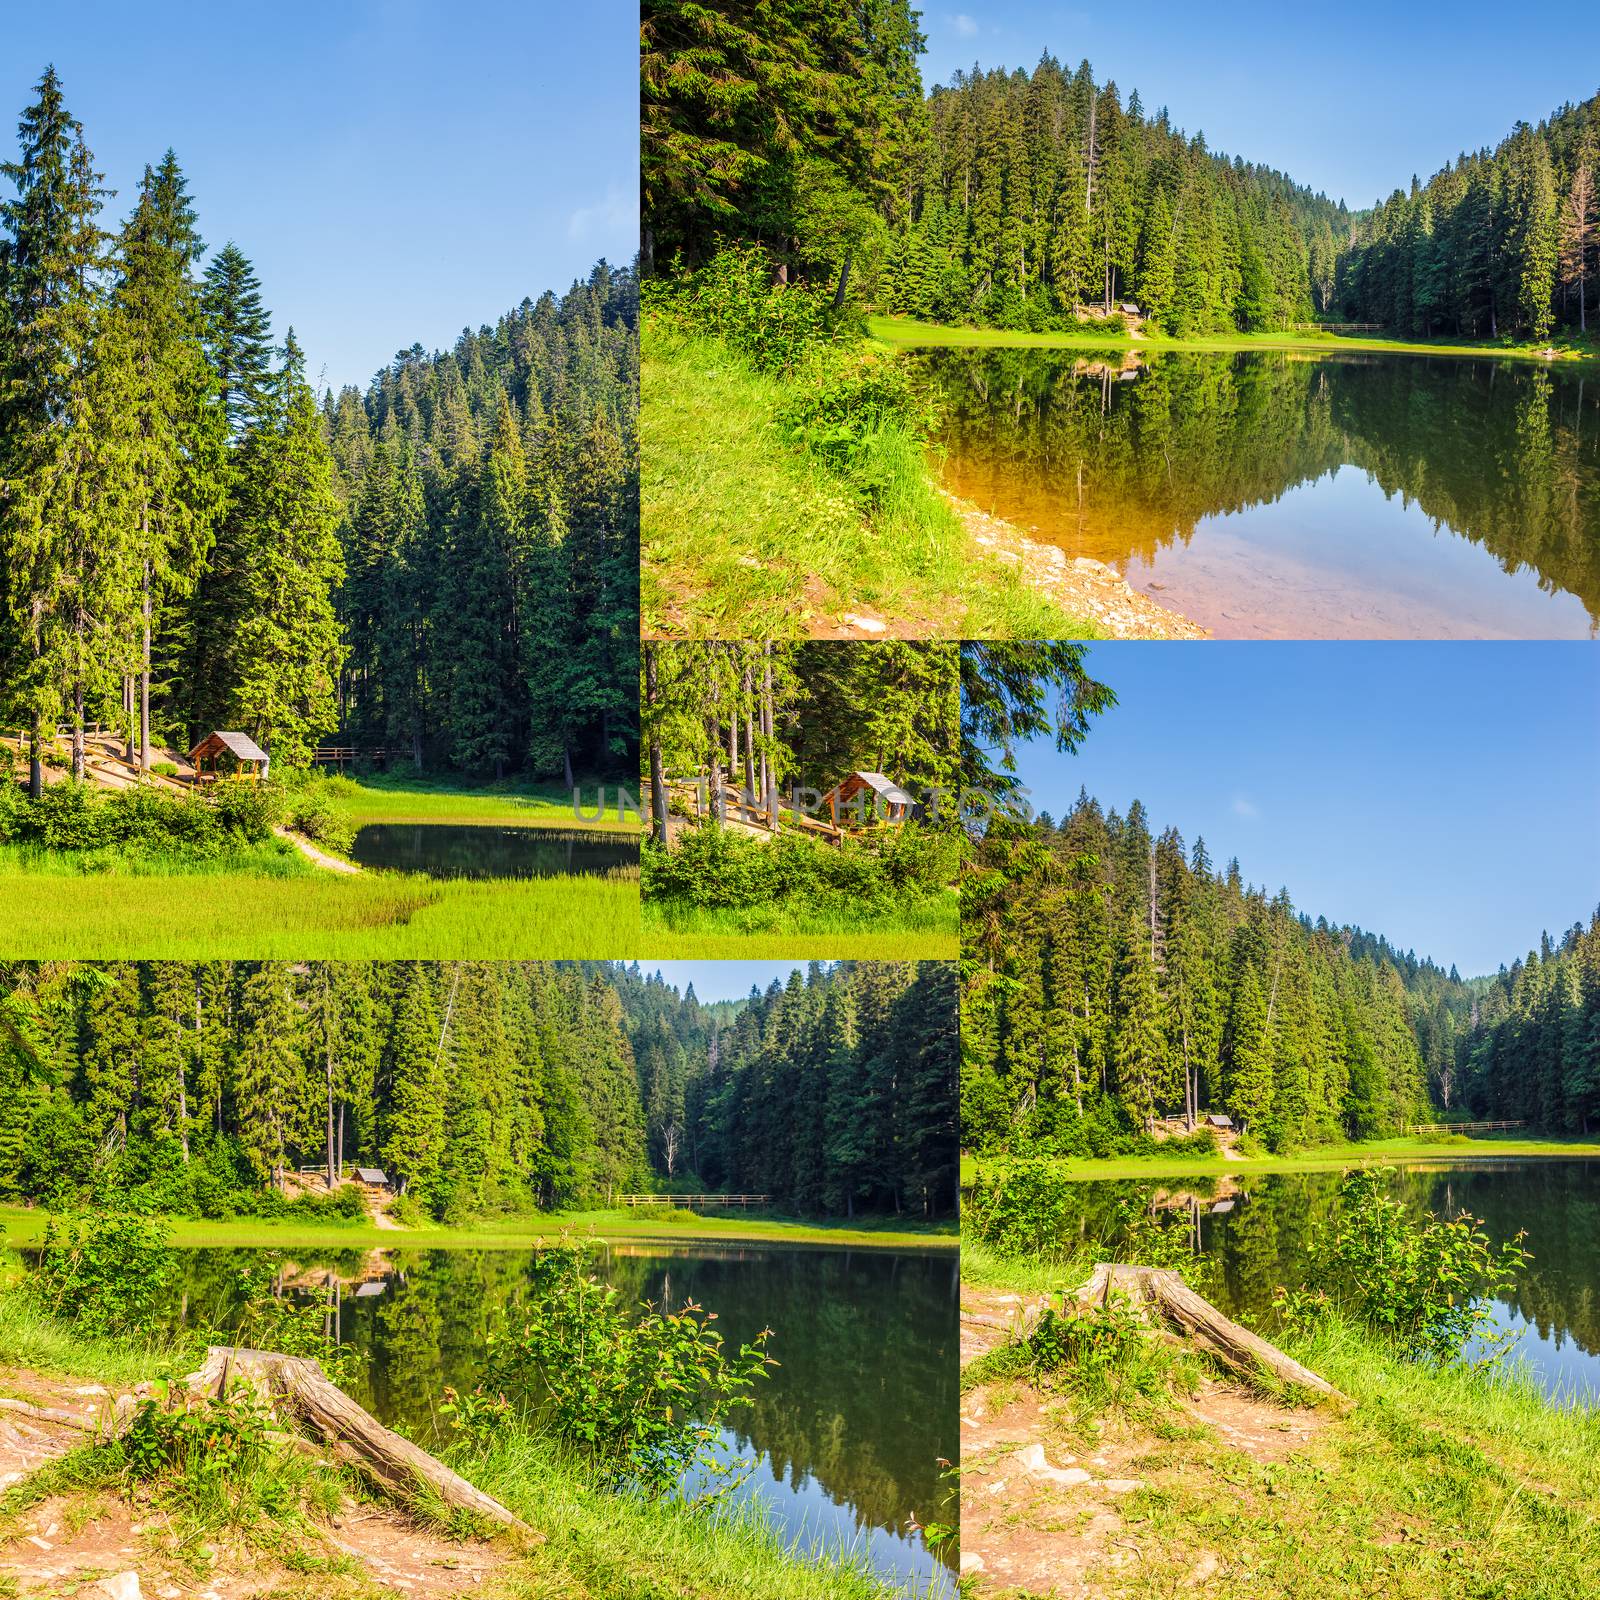 image set of spruce forest around the lake in mountains by Pellinni